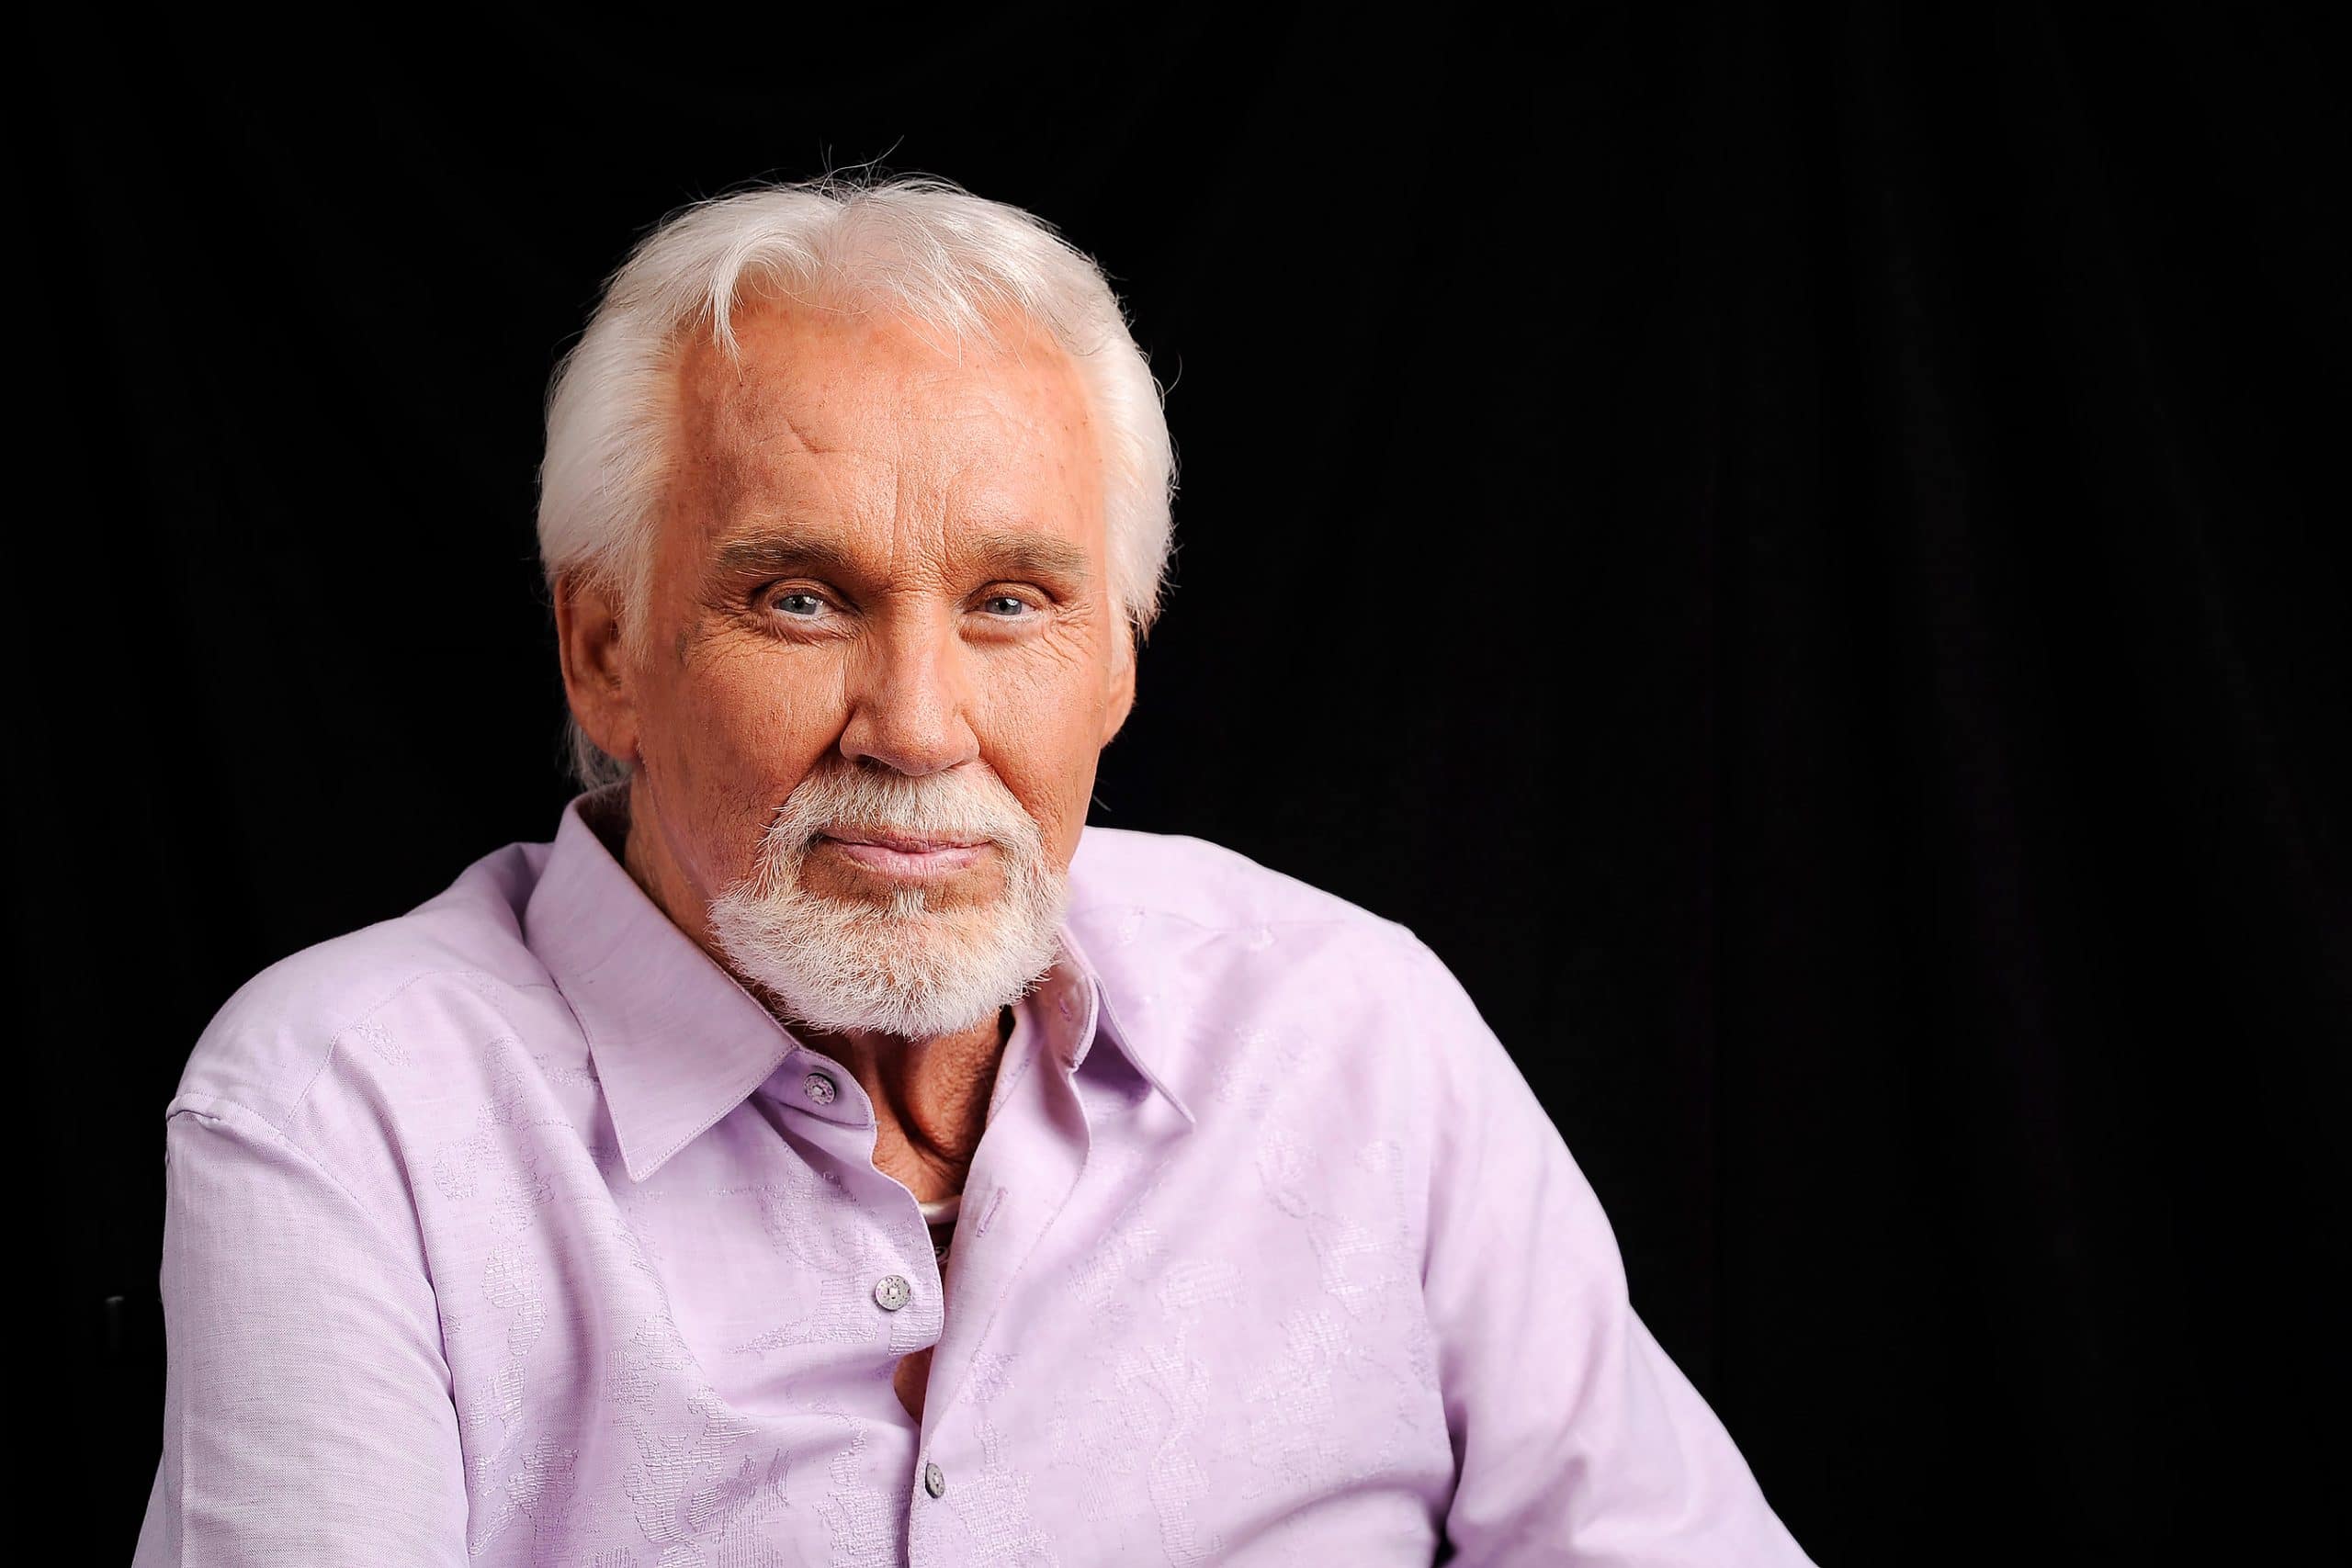 WhyHunger Co-Founder & Ambassador, Bill Ayres Remembers Kenny Rogers